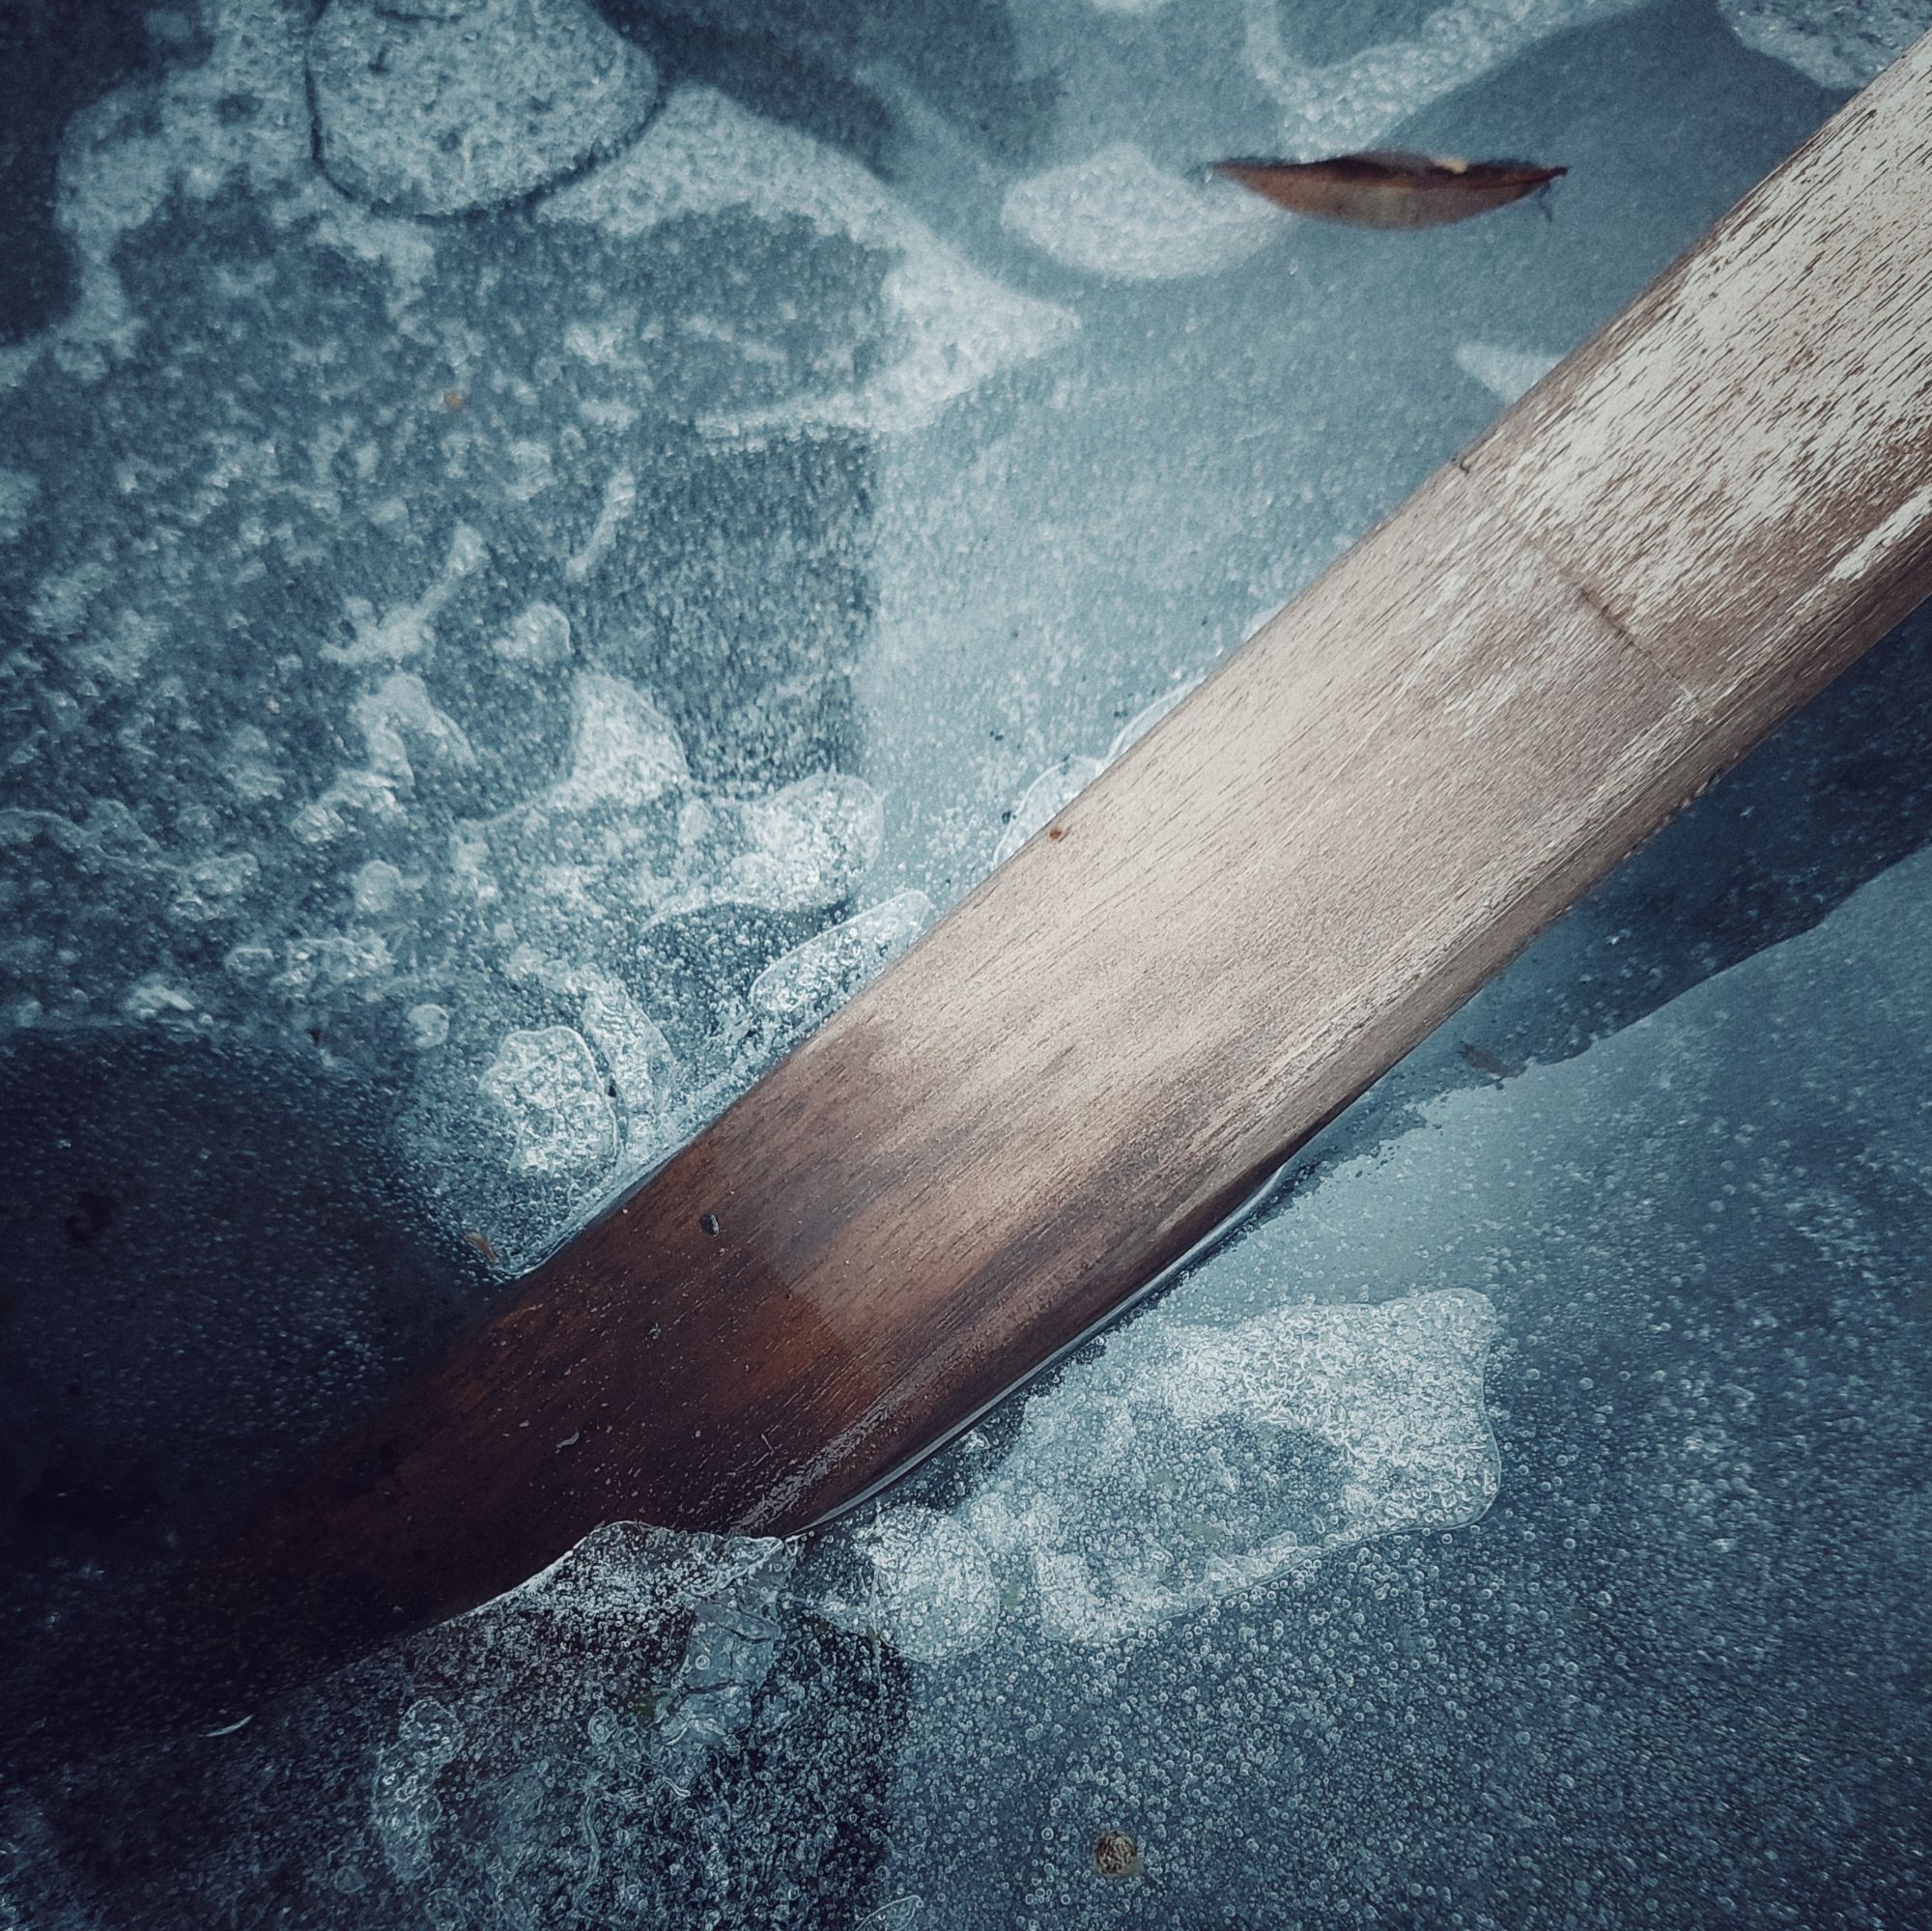 A wooden stick tightly frozen into ice.